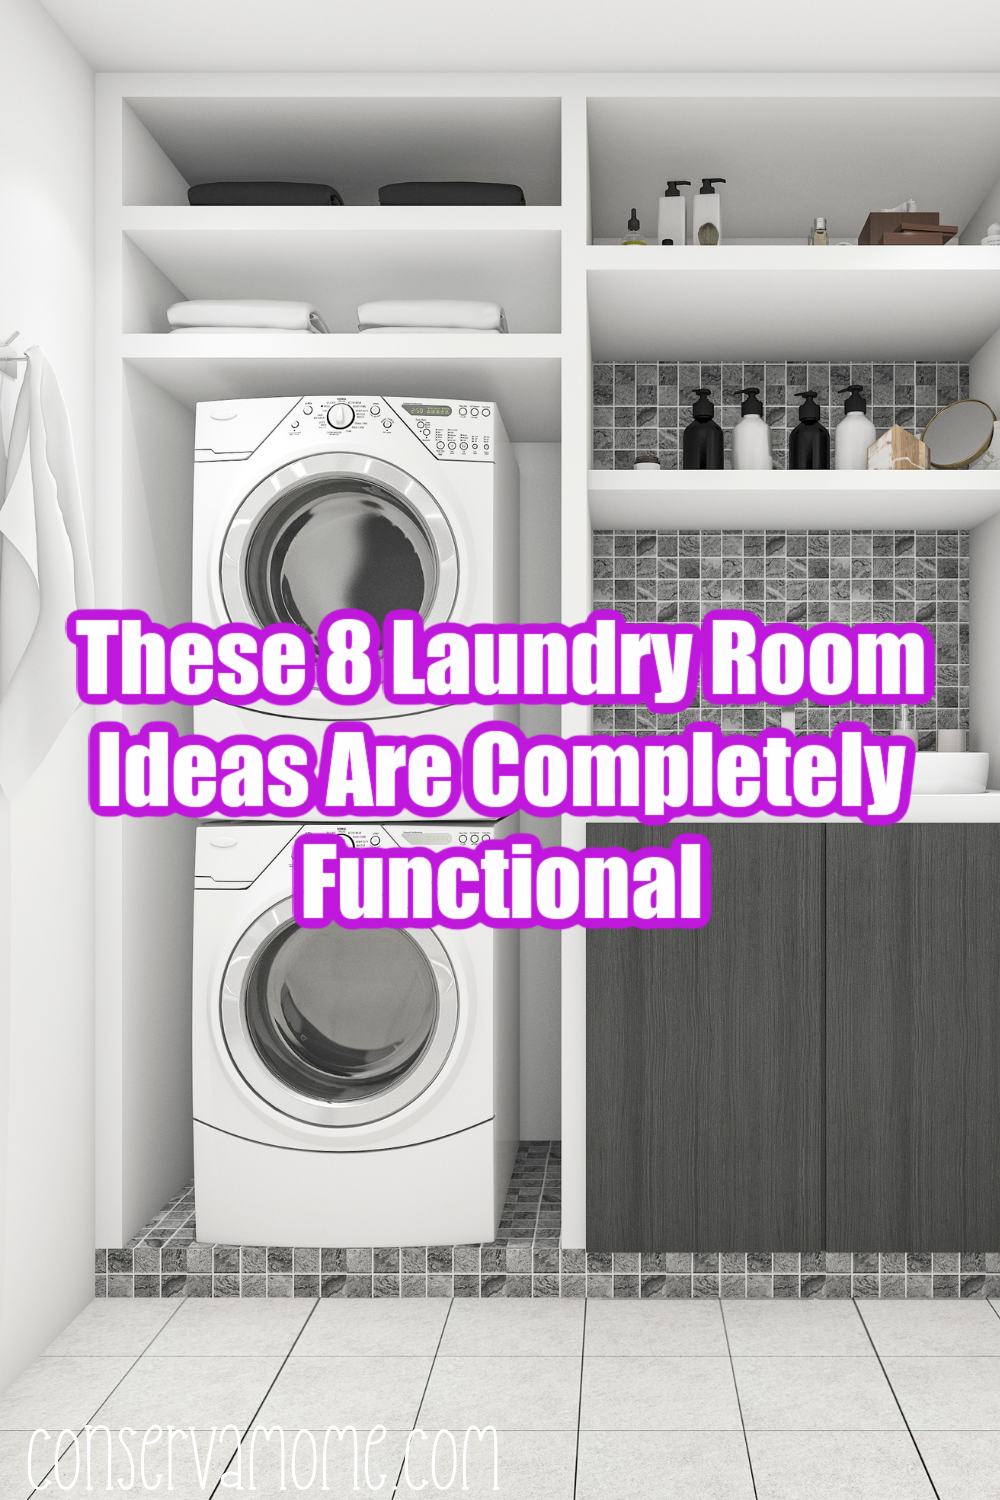 These 8 Laundry Room Ideas that are completely functional.